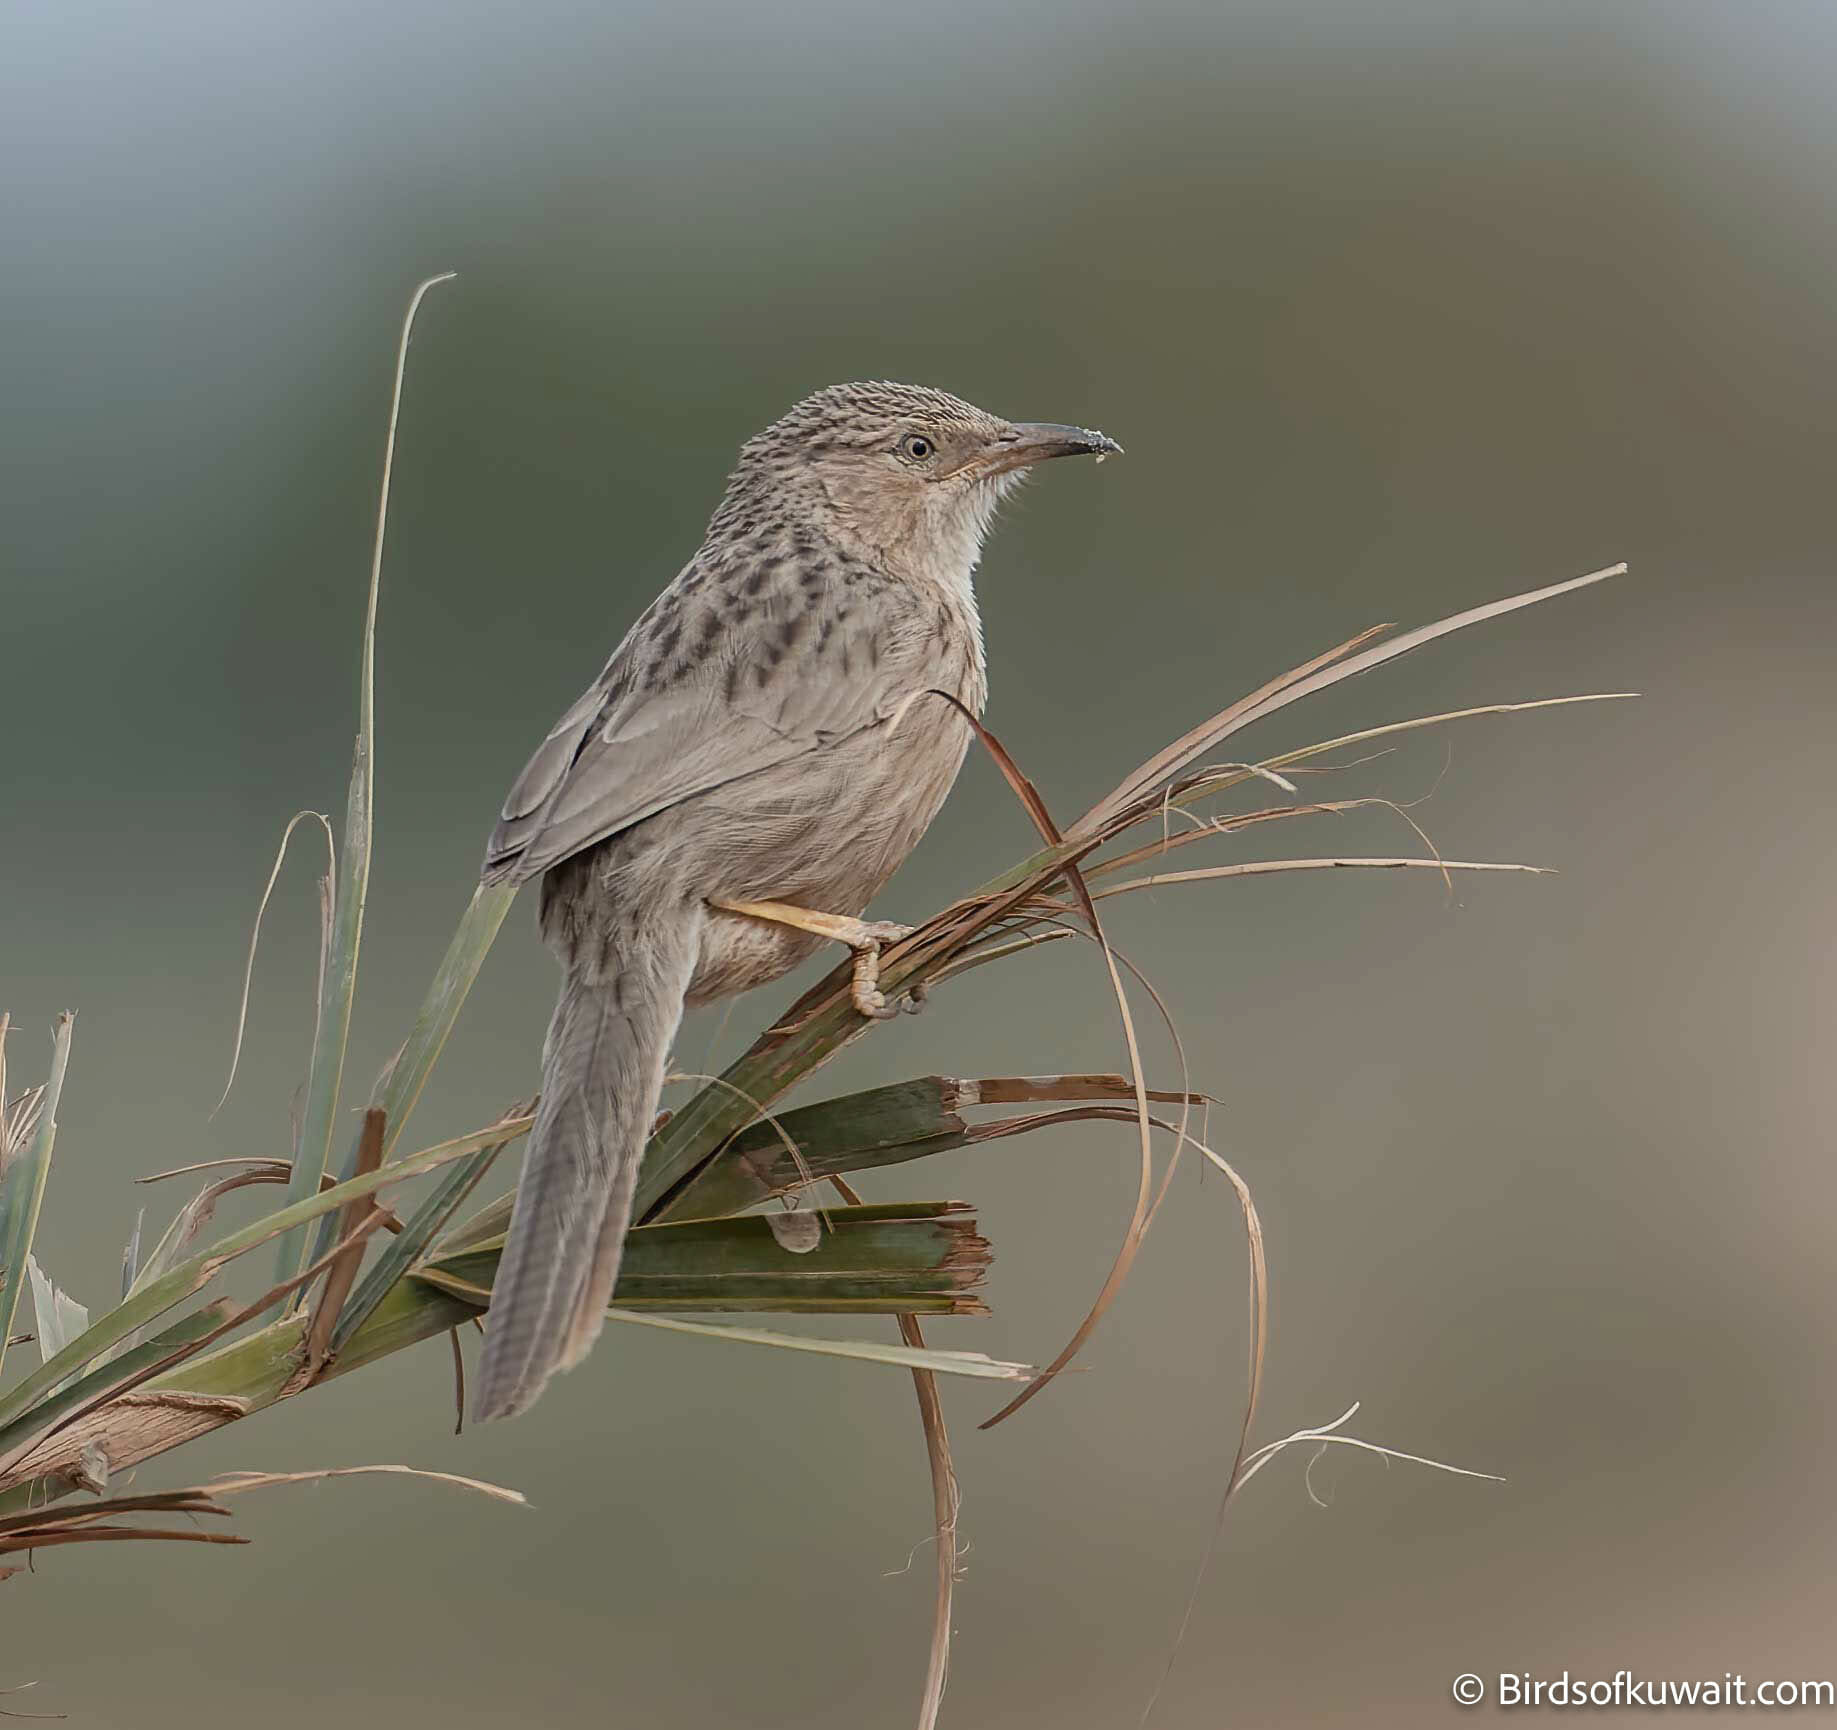 The Afghan Babbler Argya huttoni is one of the target species from Kuwait Bird